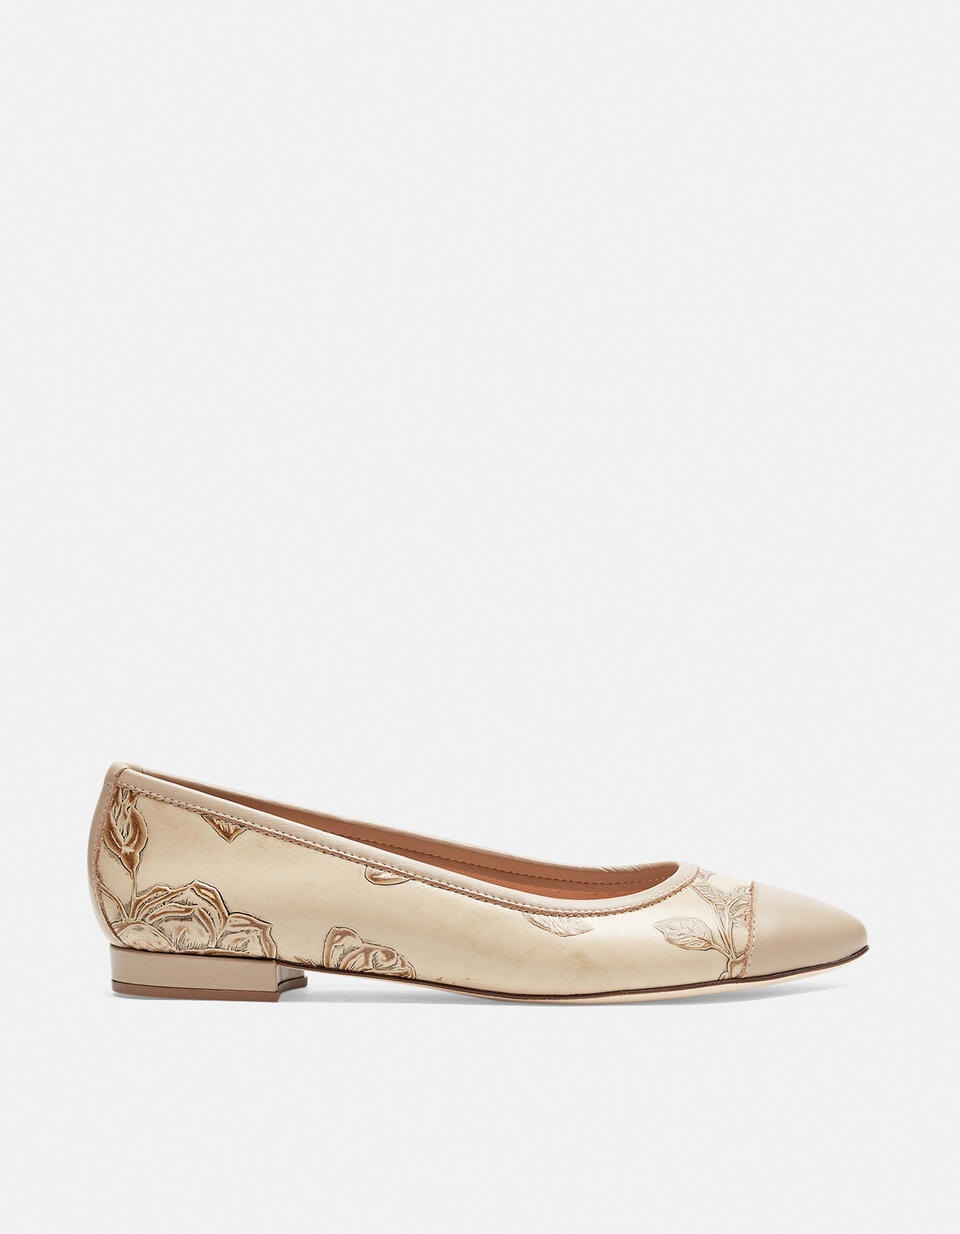 Ballerina shoes Taupe  - Woman Shoes - Shoes - Cuoieria Fiorentina